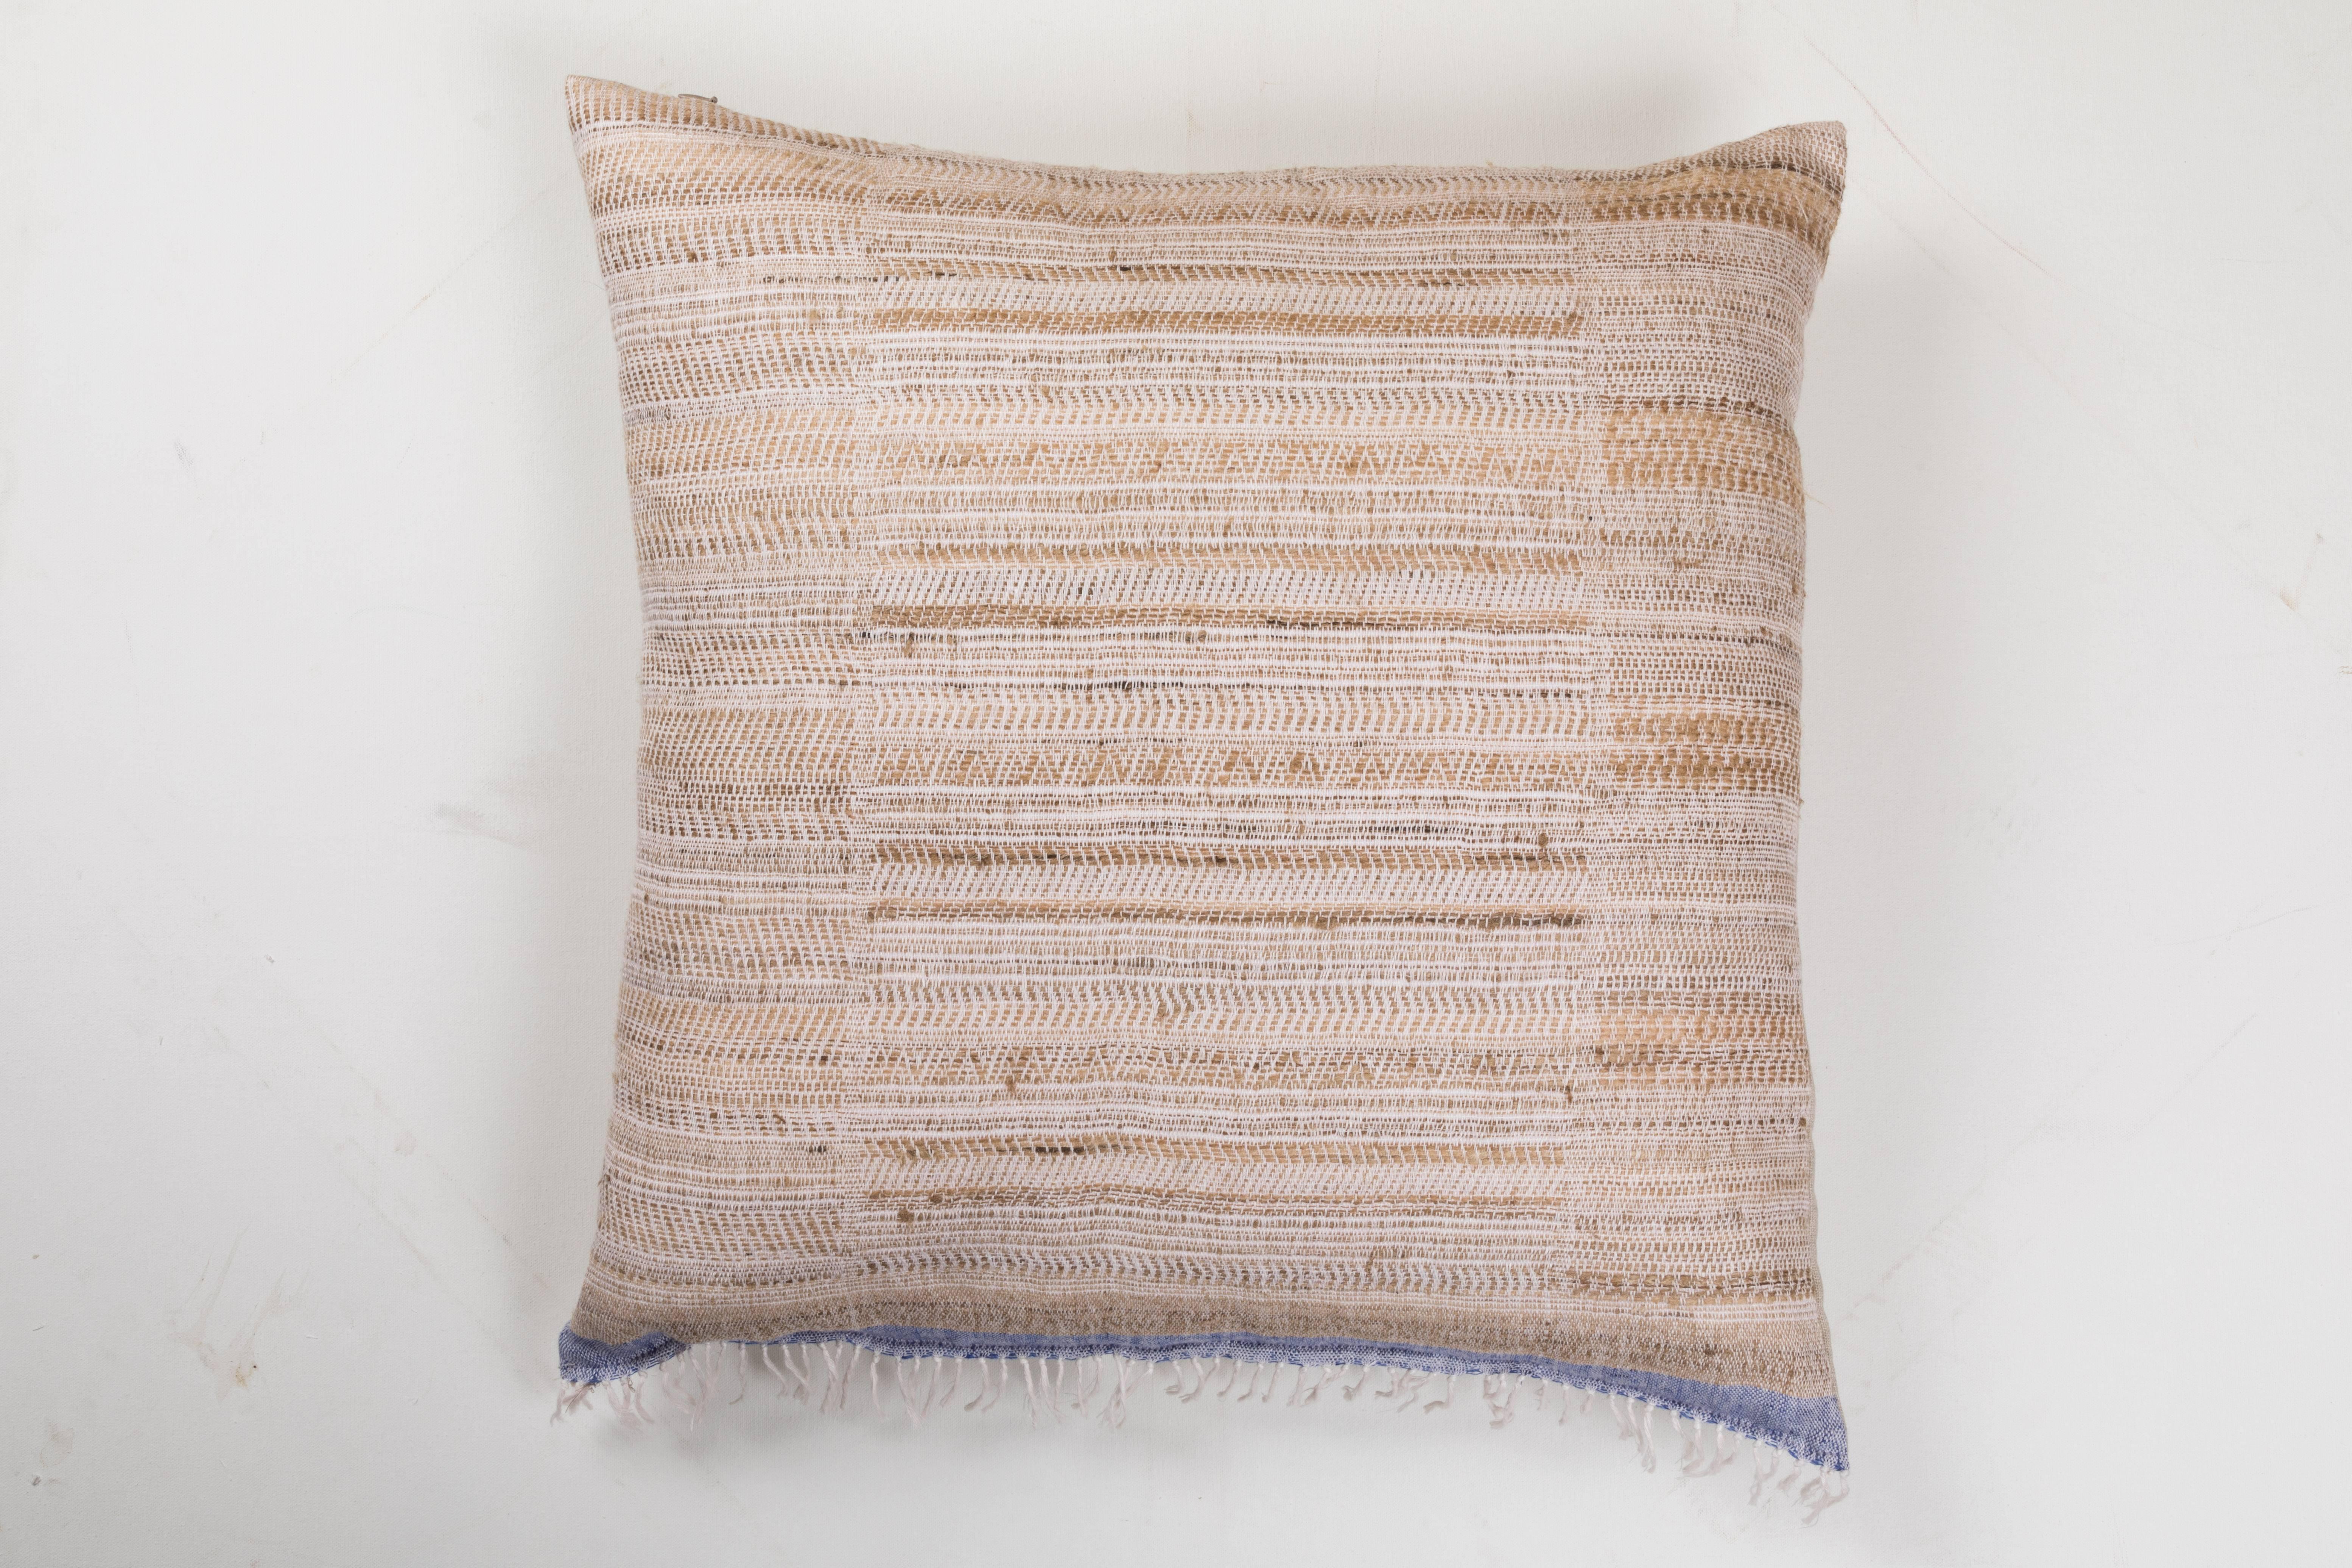 A contemporary line of cushions, pillows, throws, bedcovers, bedspreads  and yardage  hand woven in  India on antique Jacquard looms.  Hand spun wool, cotton, linen, and raw silk give the textiles an appealing uneven quality. Sizes vary